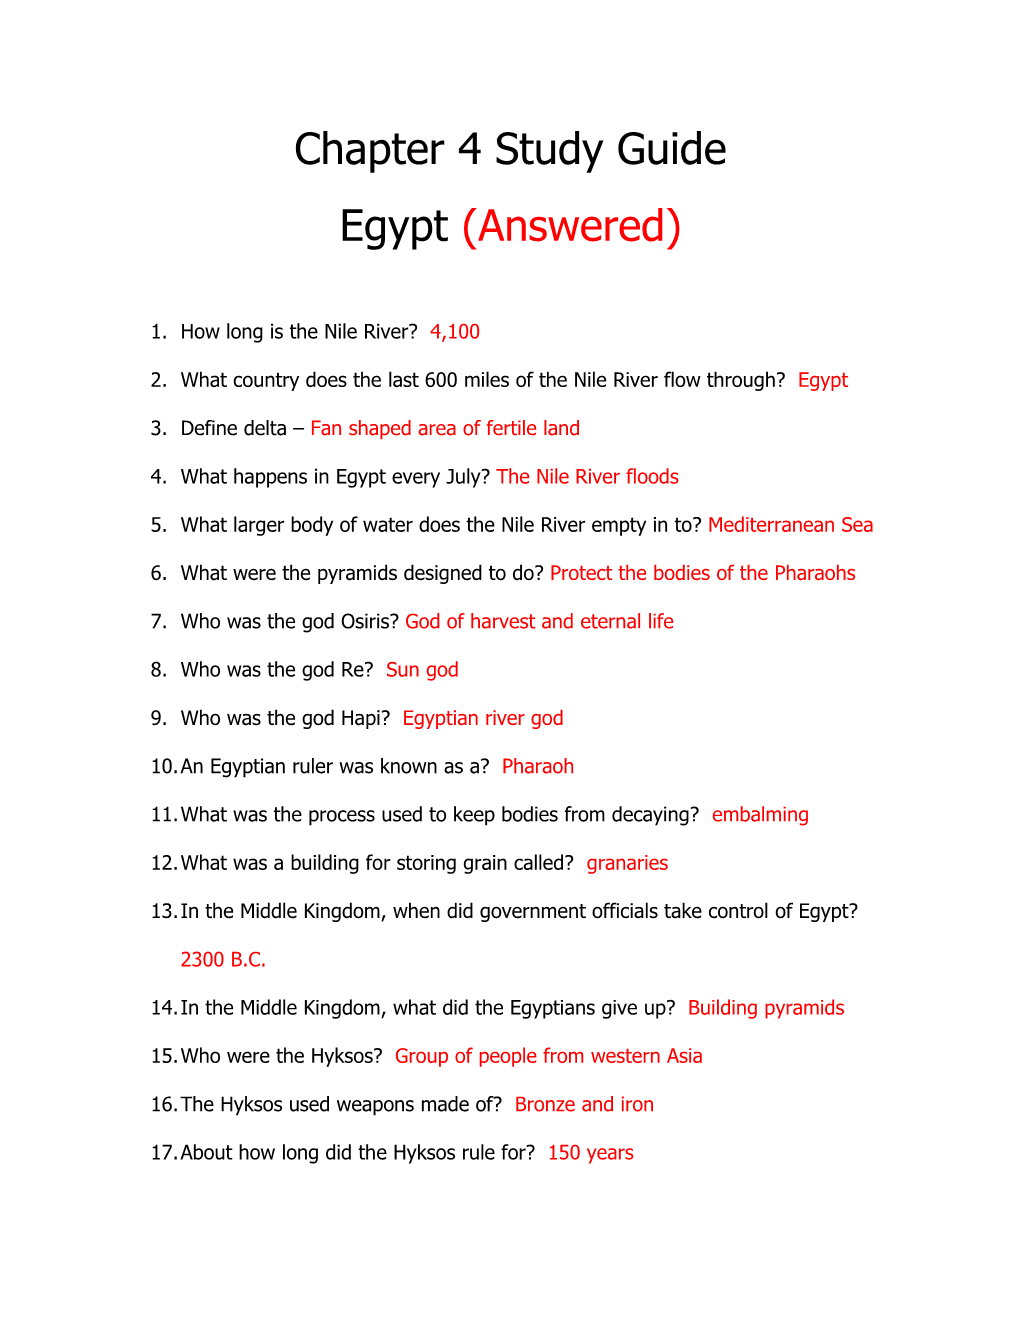 Chapter 4 Study Guide Egypt (Answered)